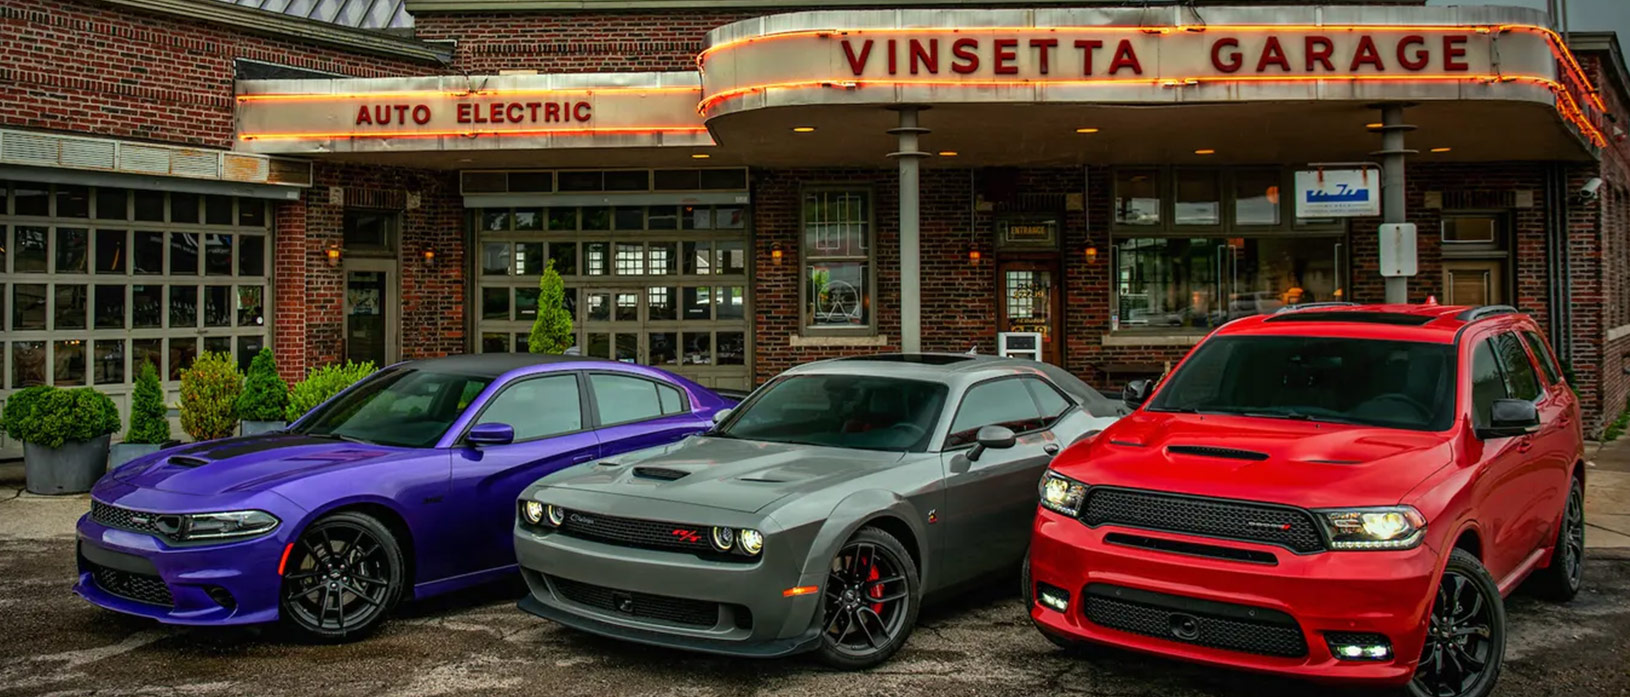 Dodge Challenger Ranked as America’s Most Perfect Car